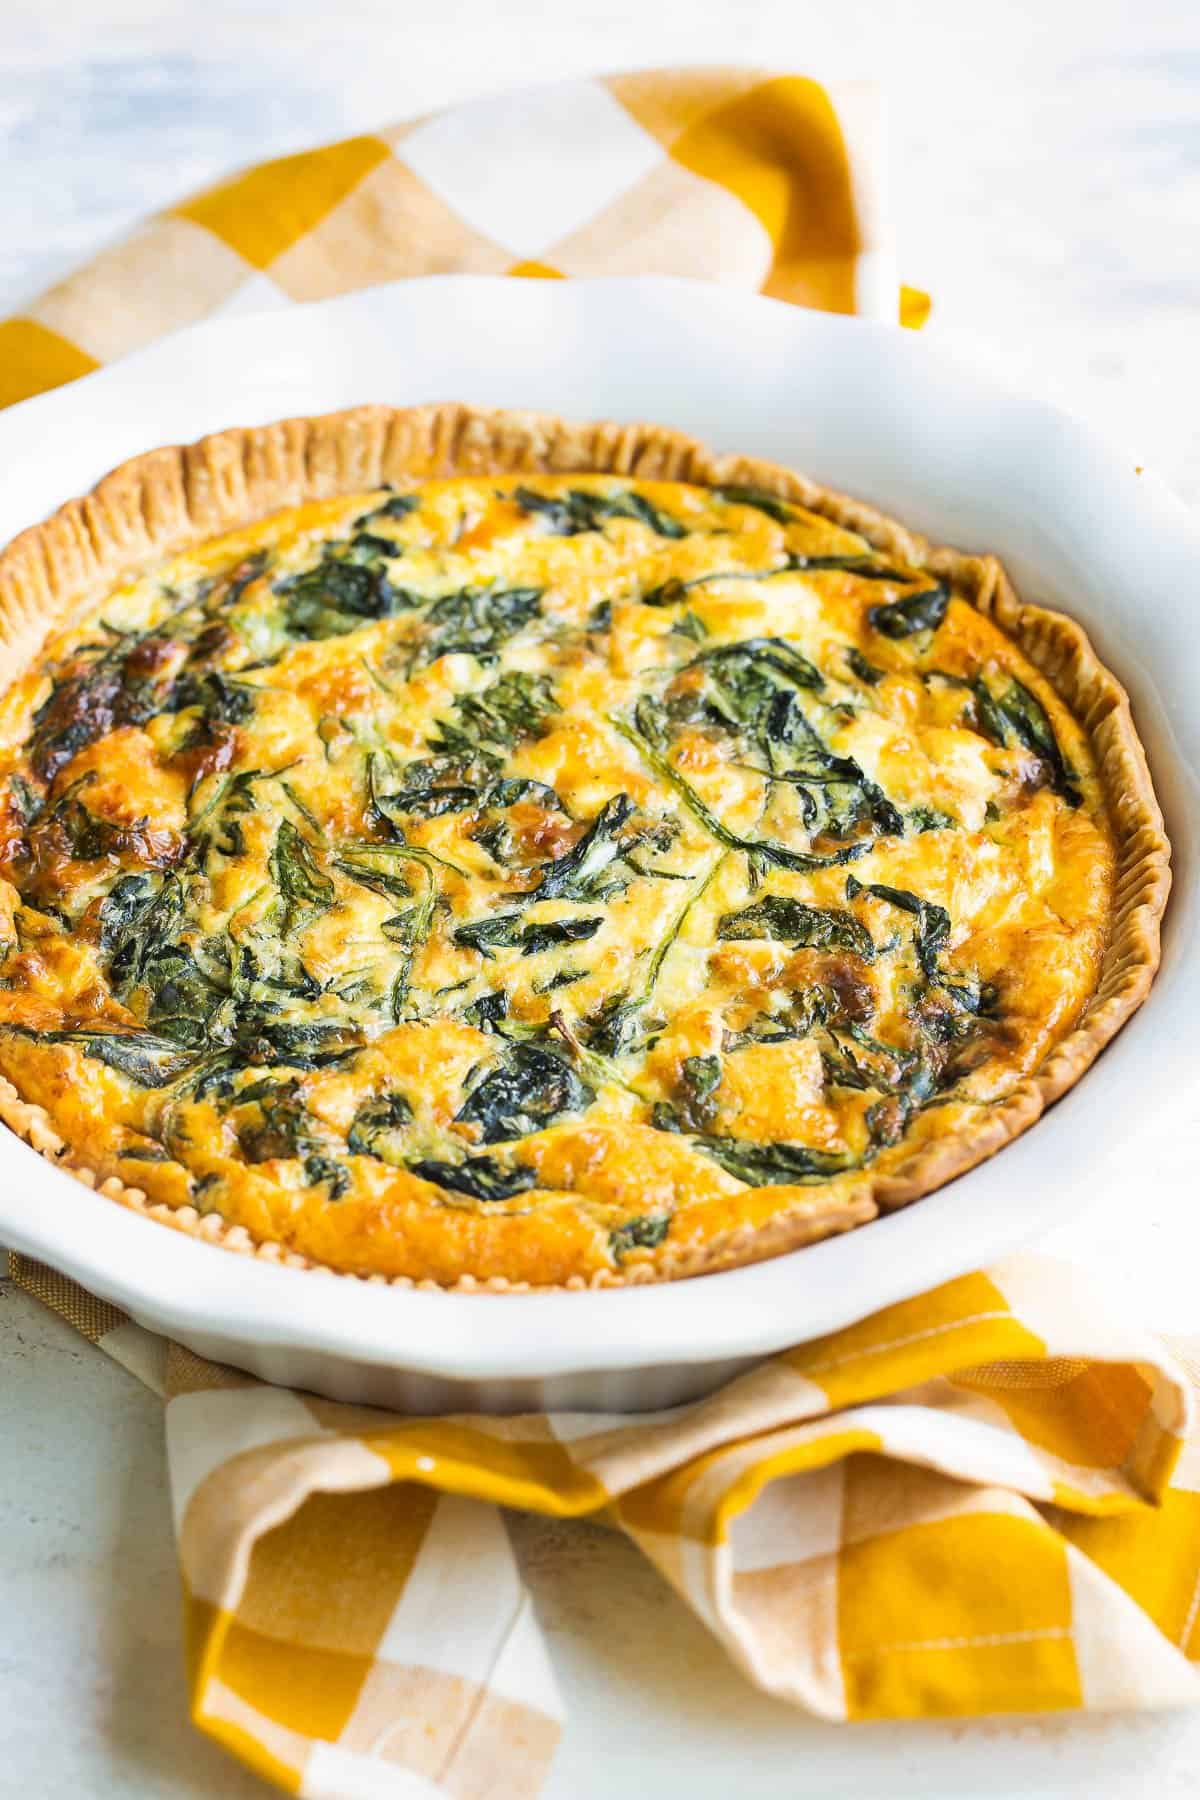 Baked quiche in a baking dish.